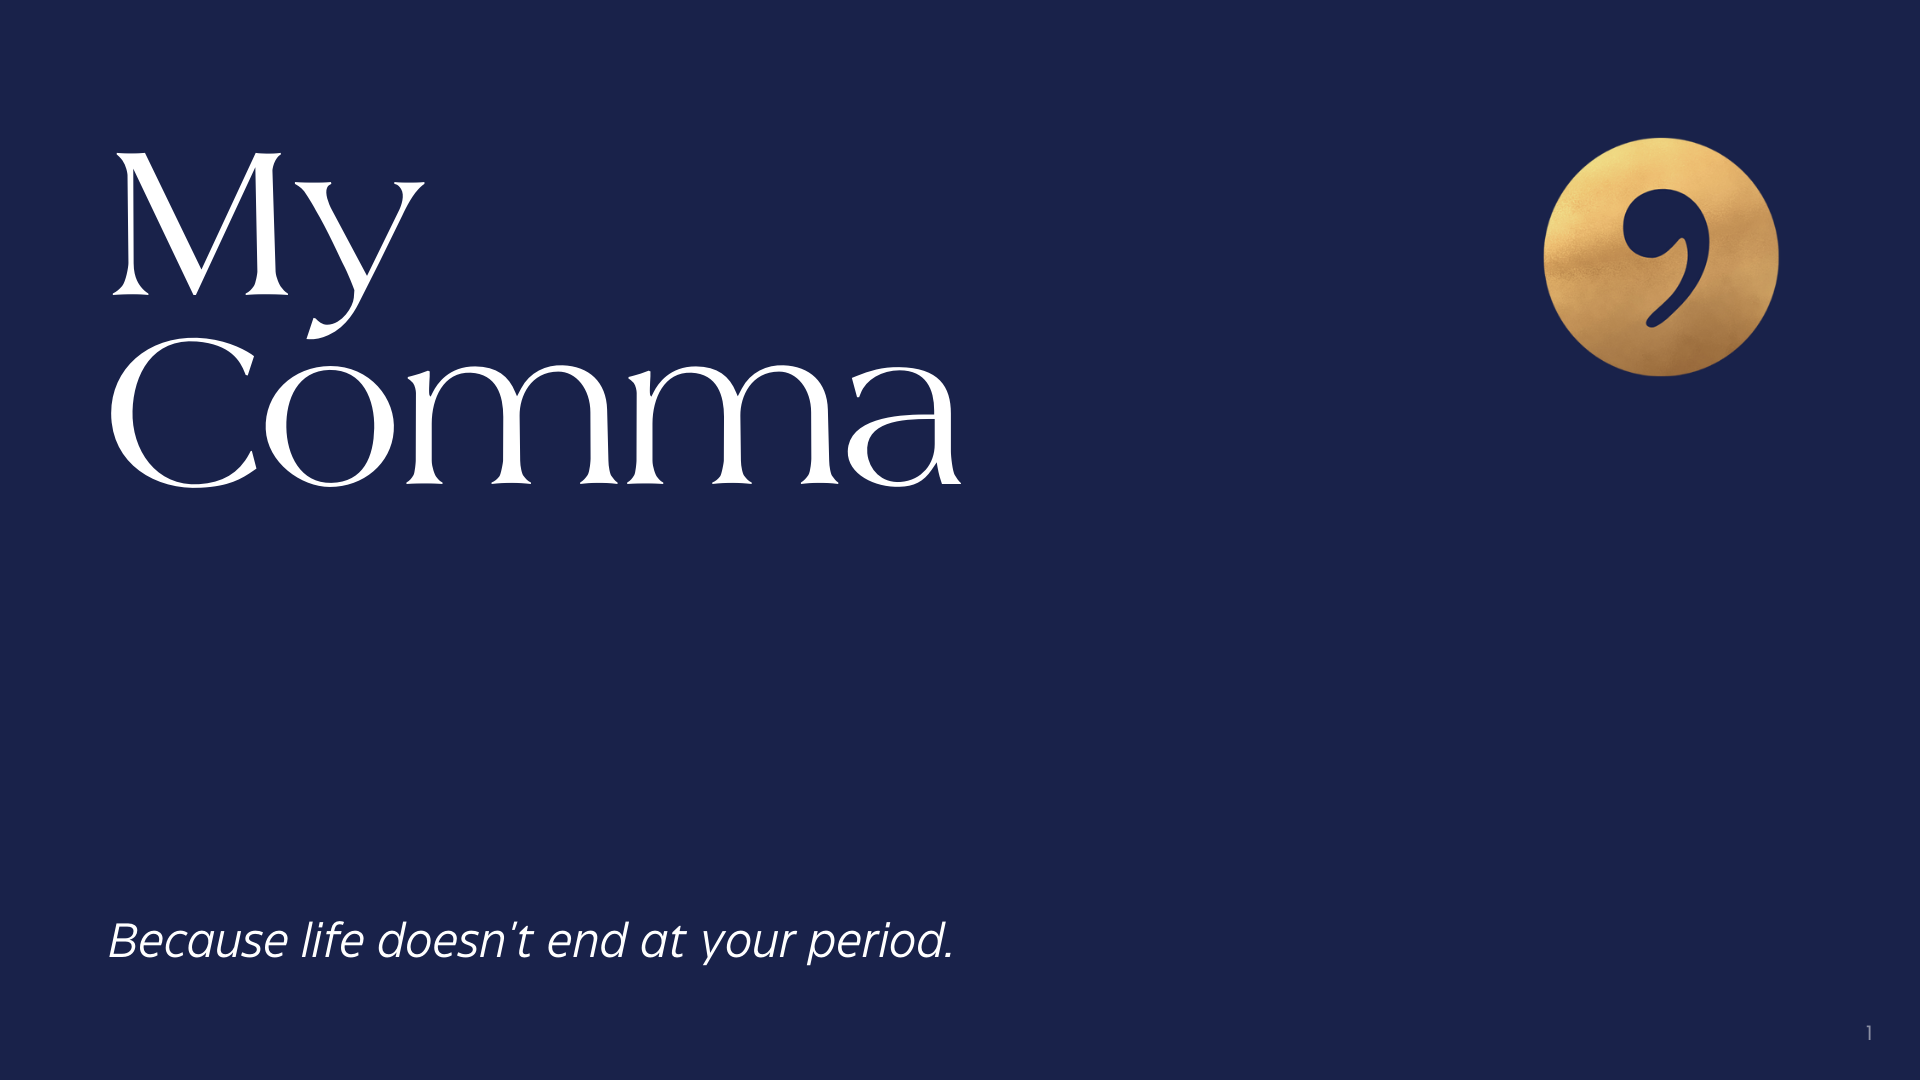 My Comma was created to empower period people's lifestyles.